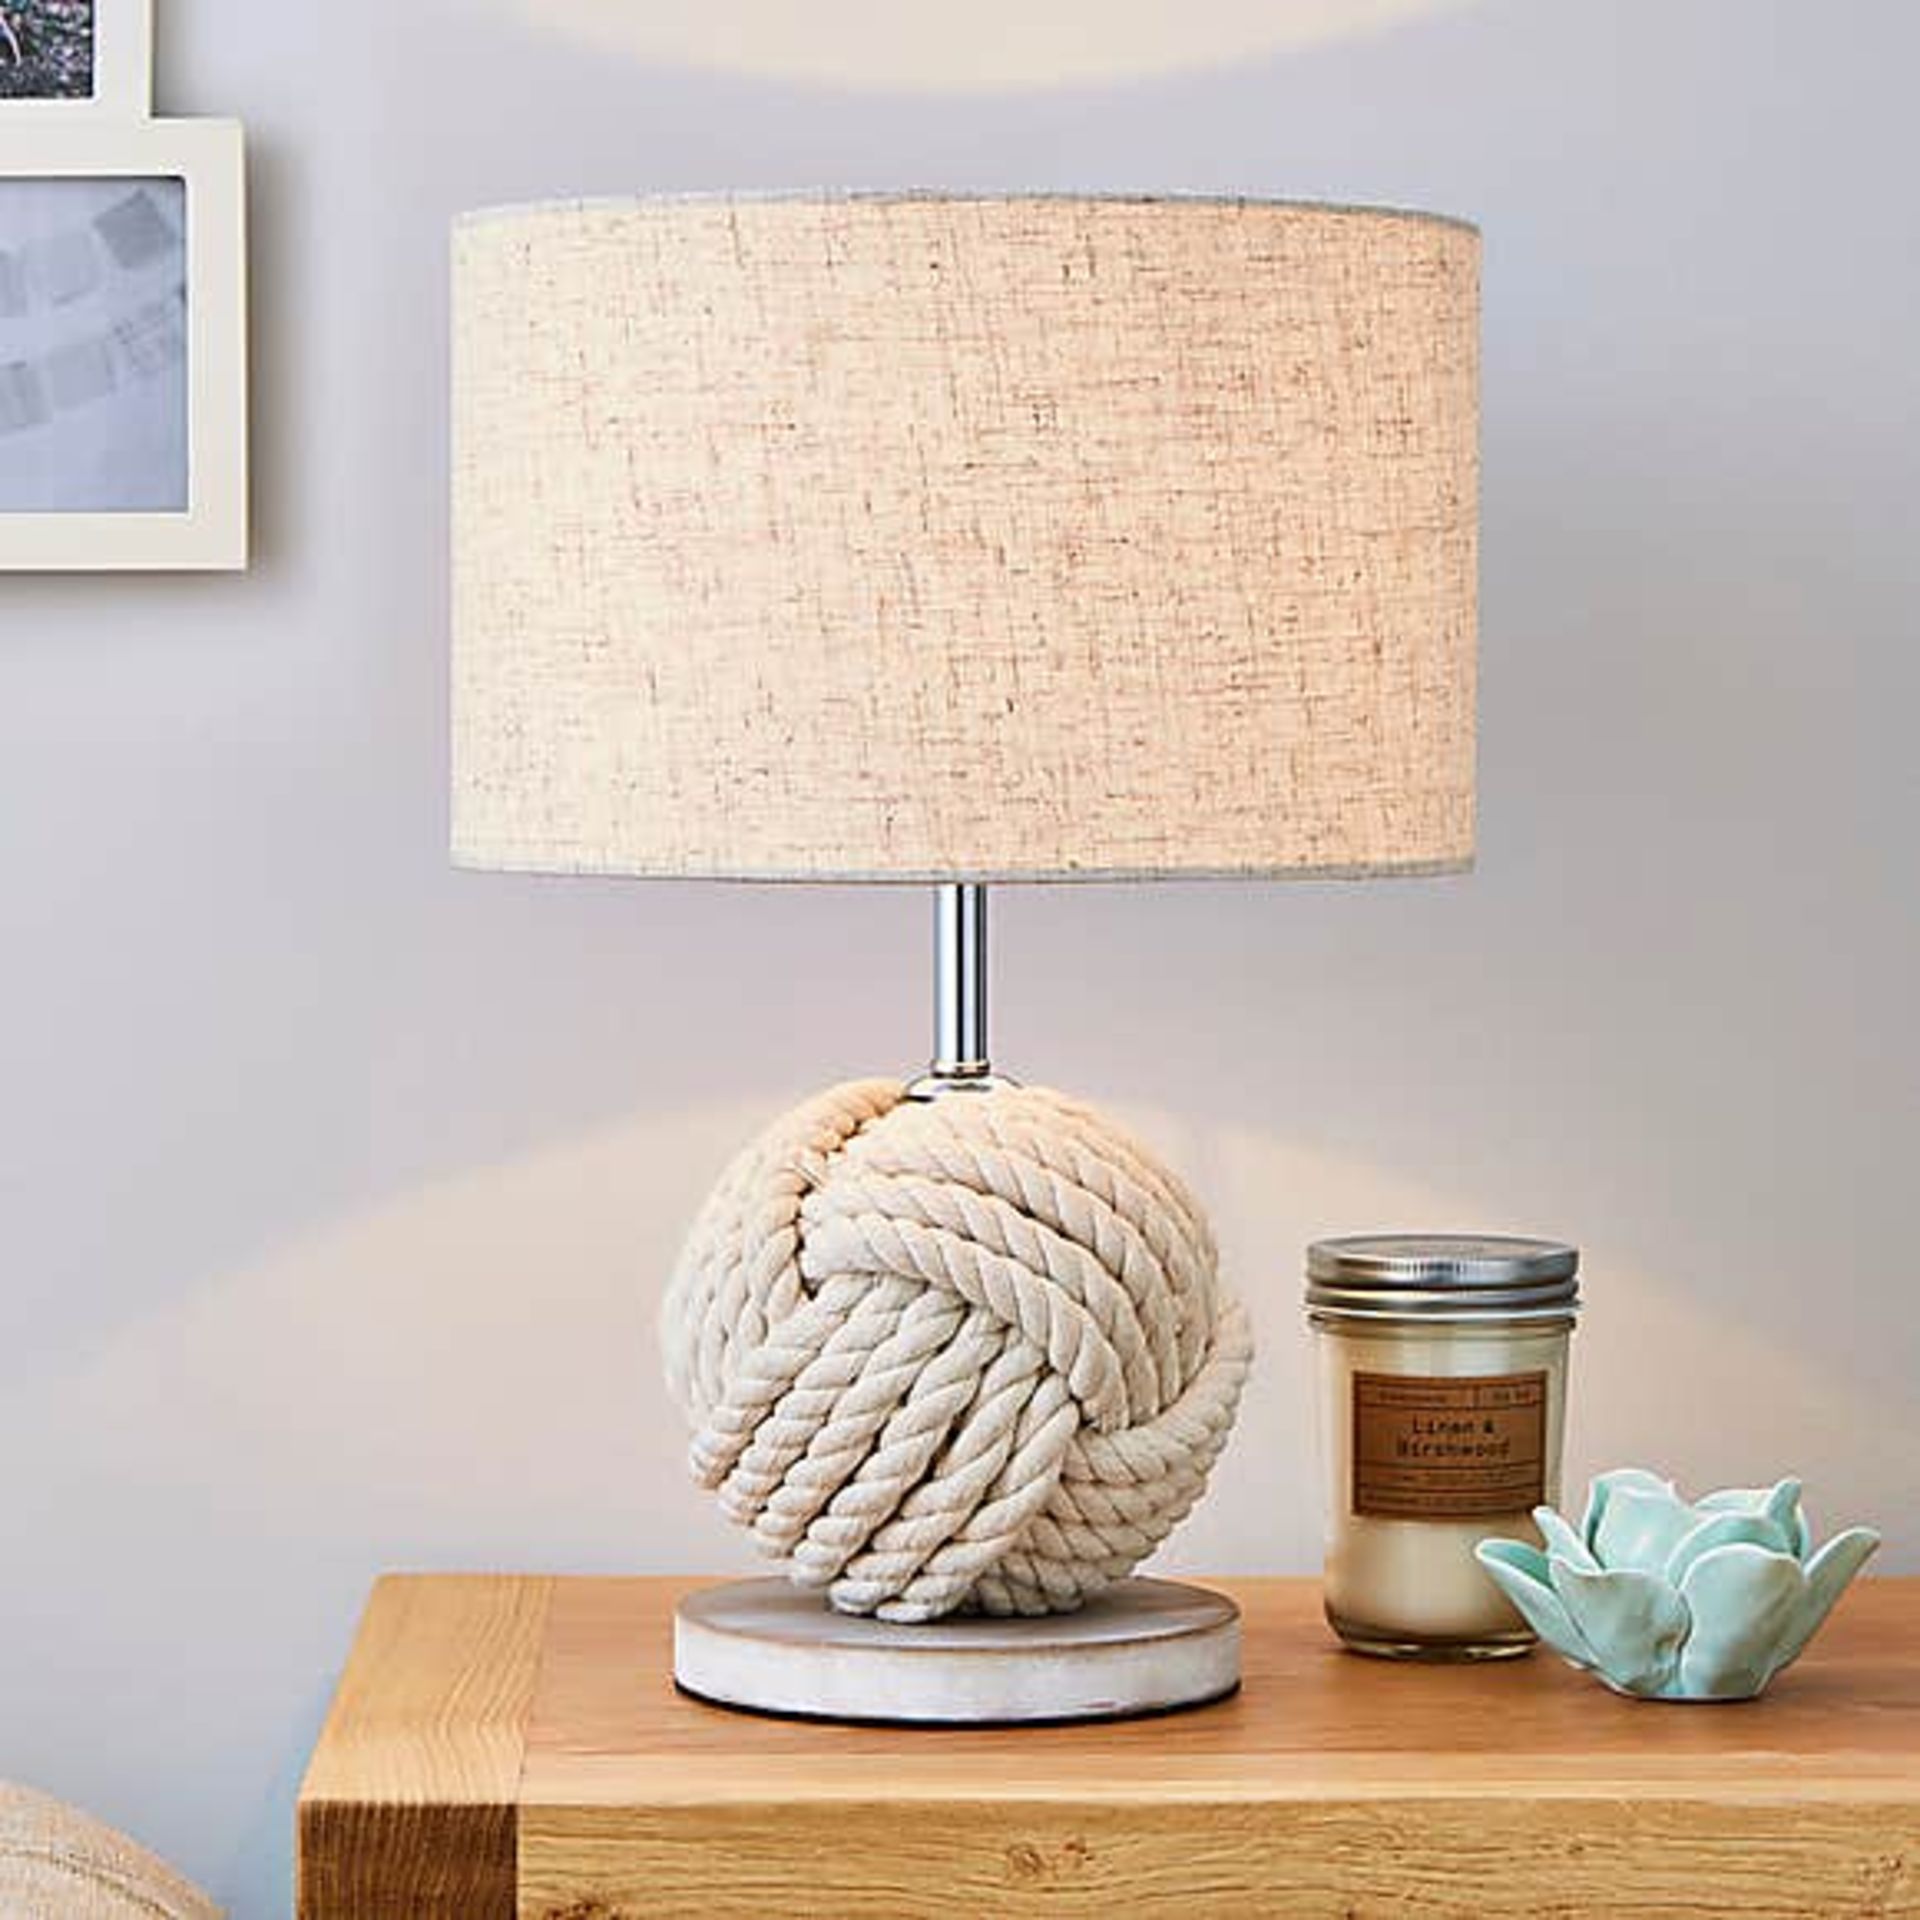 A pair of Lina table lamp features a white washed rope knotted into a ball to create a unique lamp